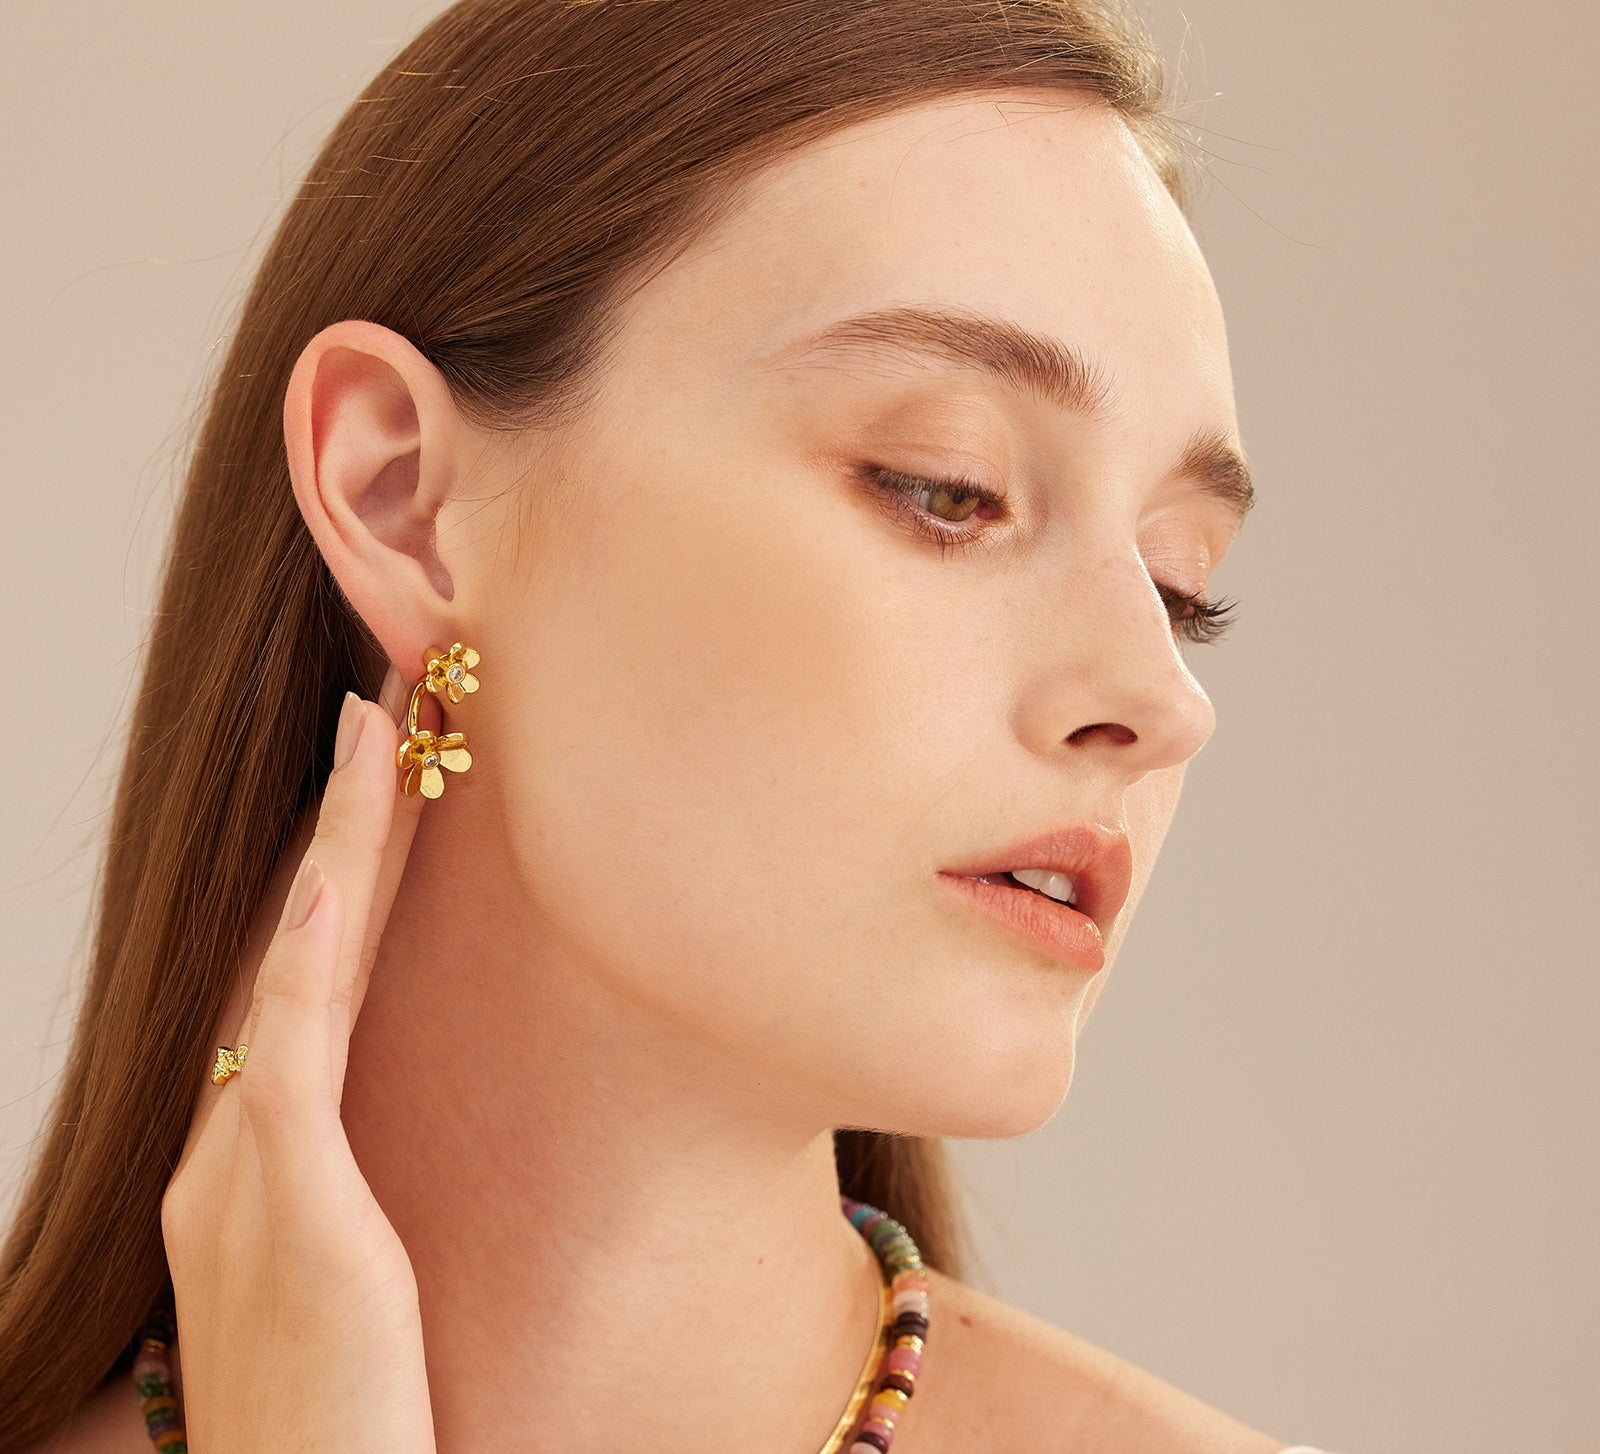 Hoop Earrings adorned with double flower charms, a stylish and elegant choice that adds a feminine and sophisticated flair to your look